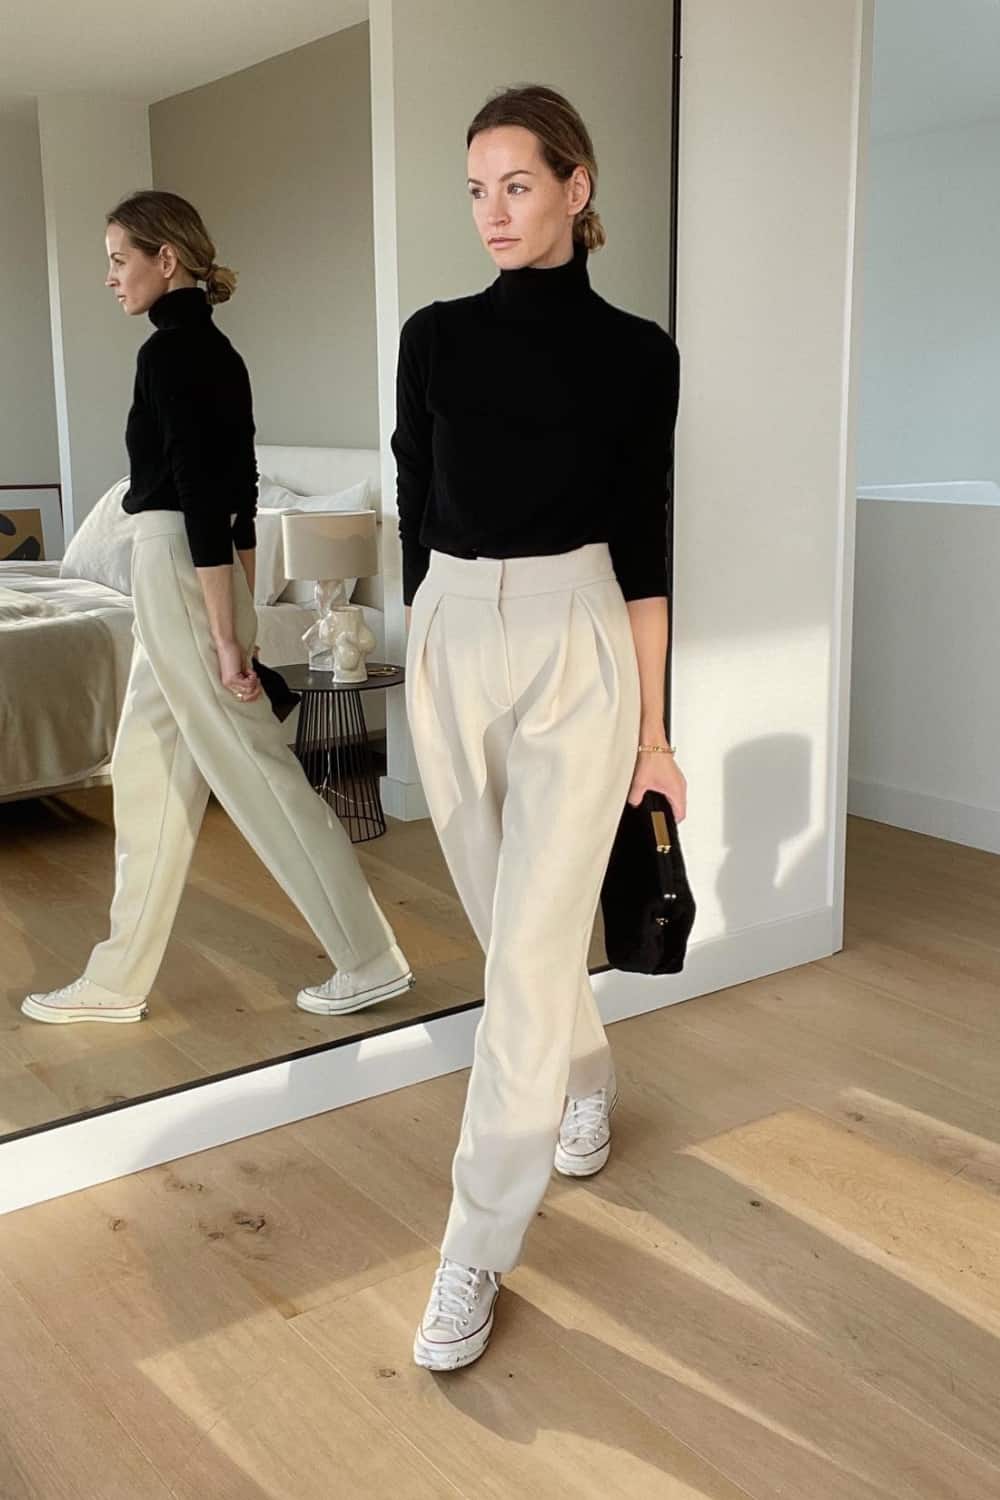 Black turtleneck sweater outfit with pants and sneakers